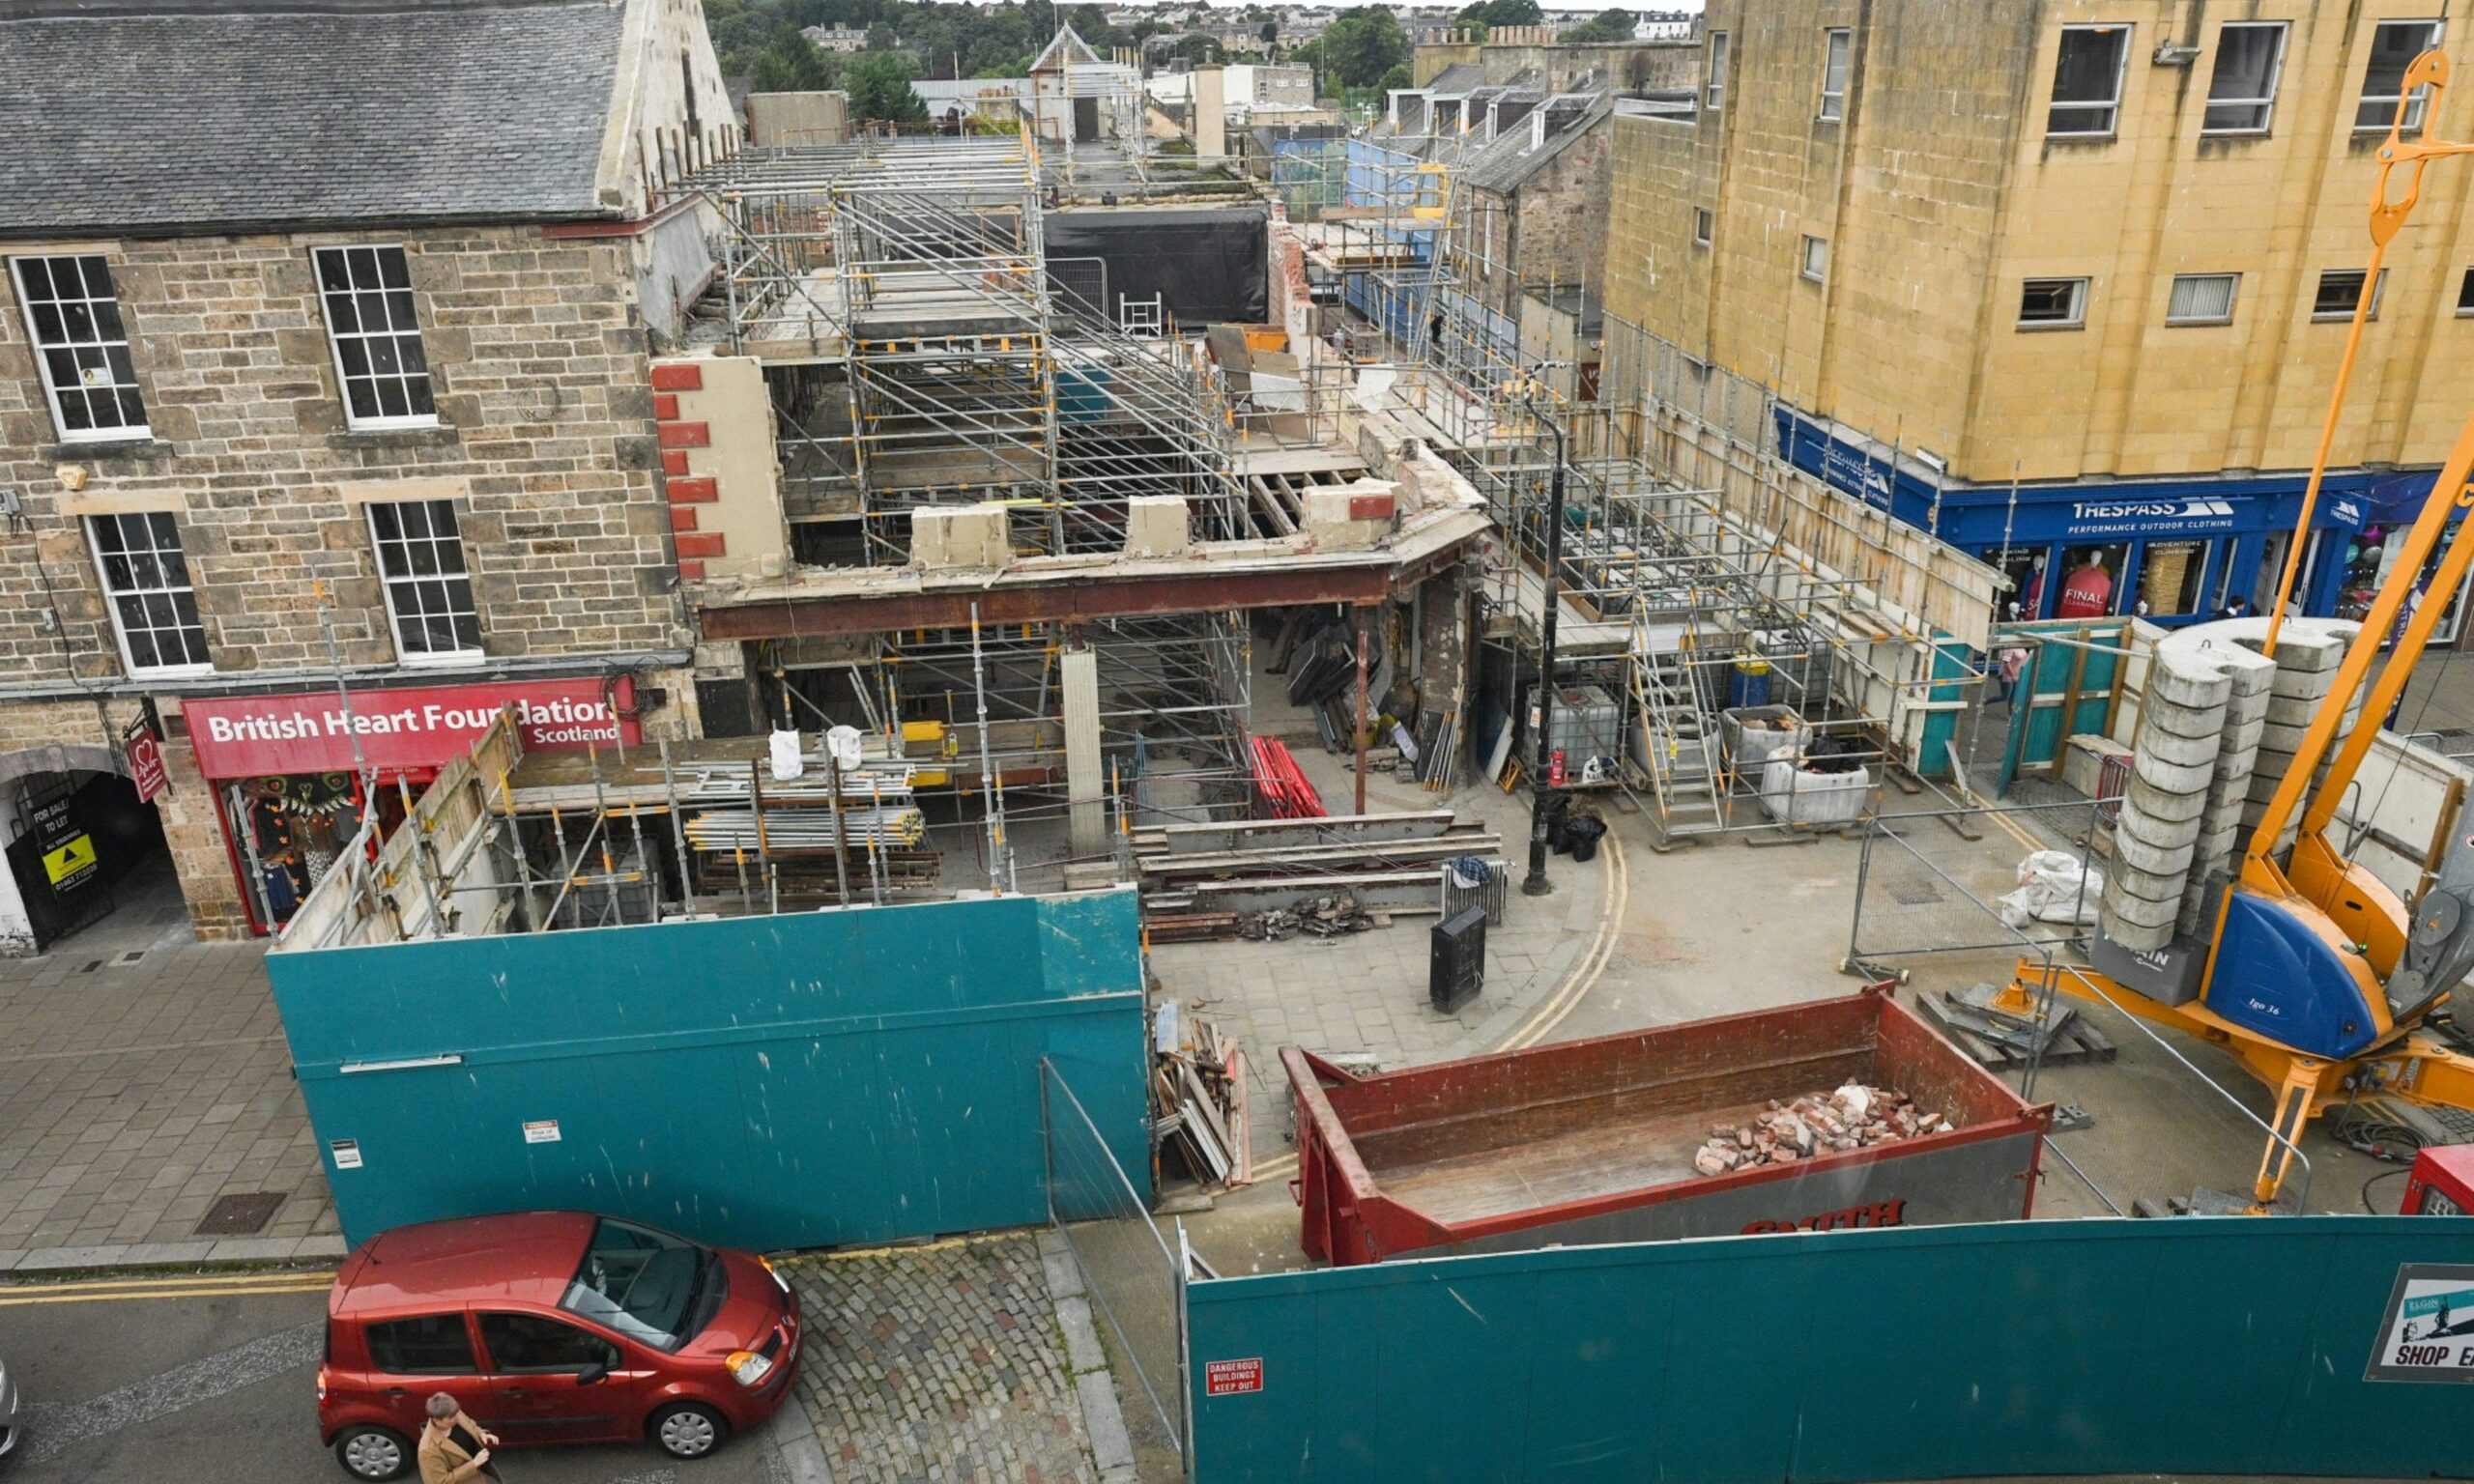 Deconstructed Poundland building viewed from above. 